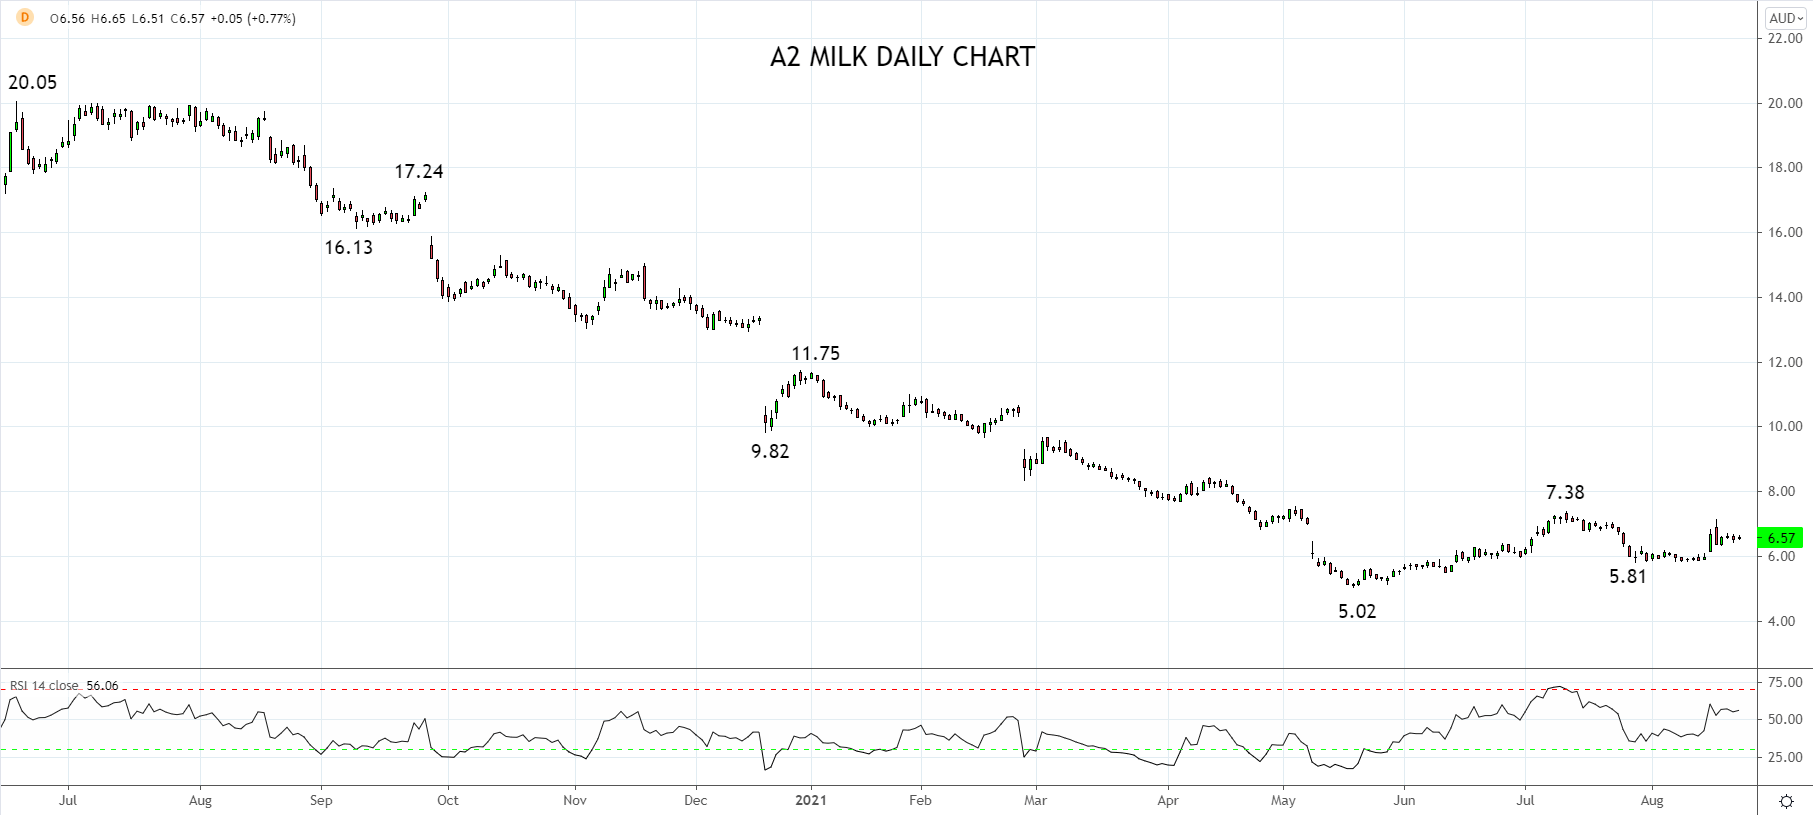 A2 Milk Daily Chart